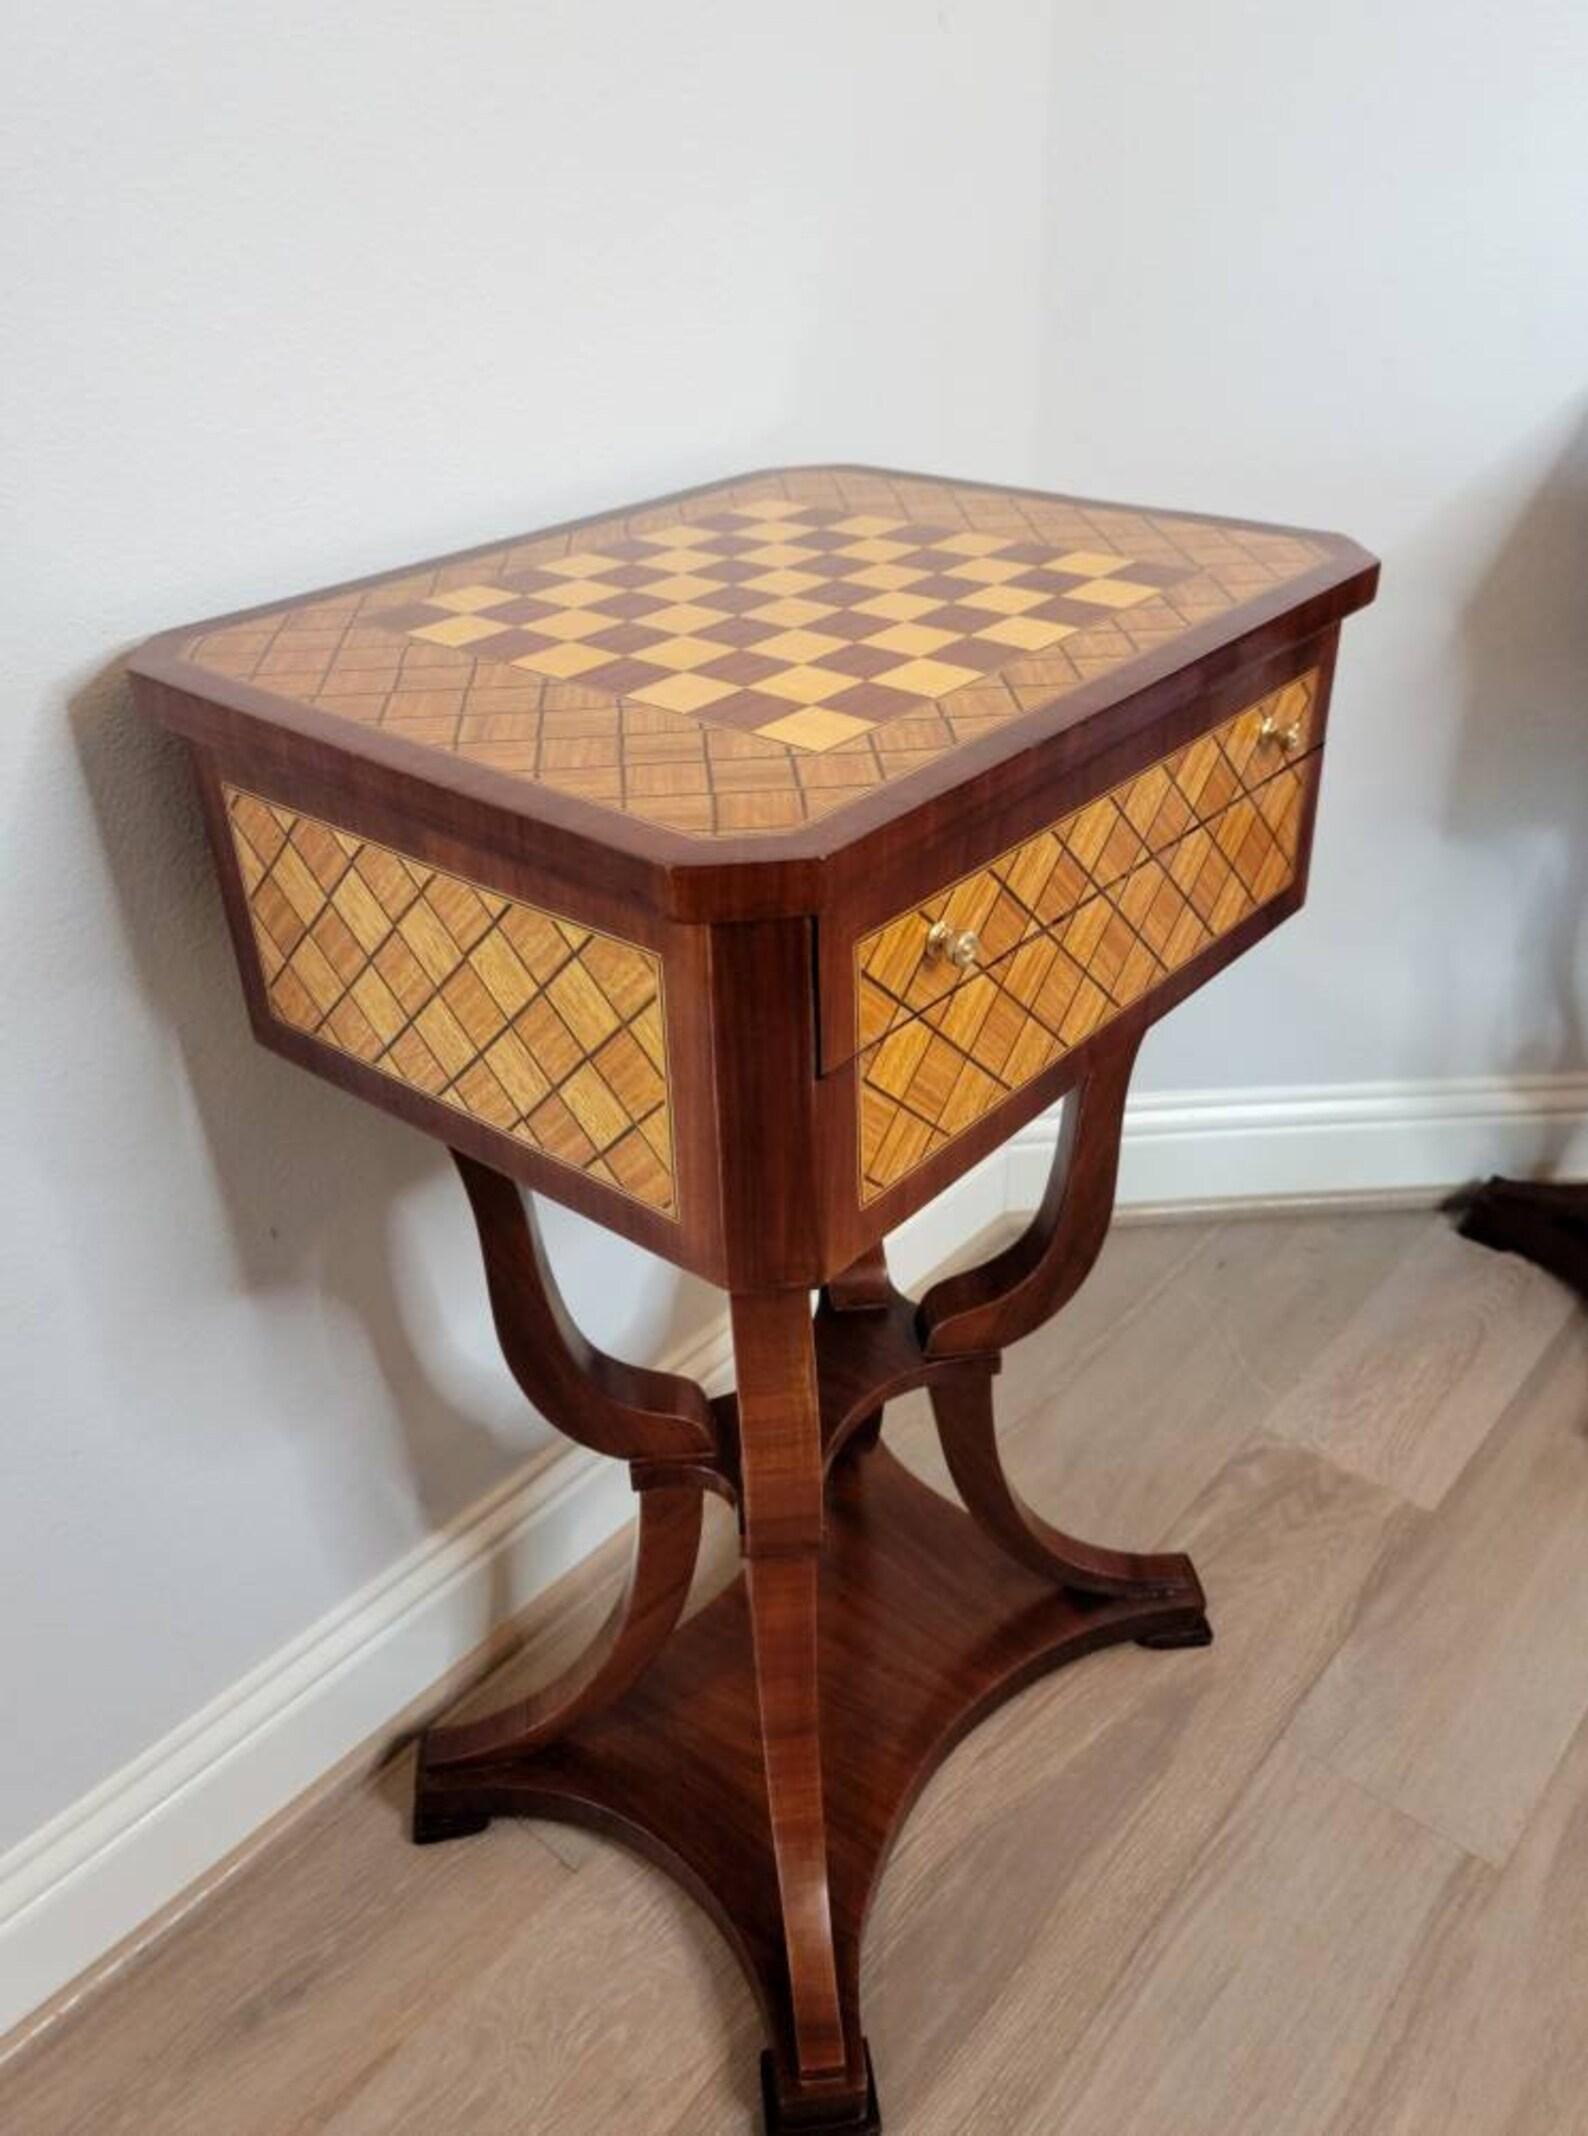 Pair of Italian Neoclassical Chessboard Parquetry Inlaid Tables For Sale 4